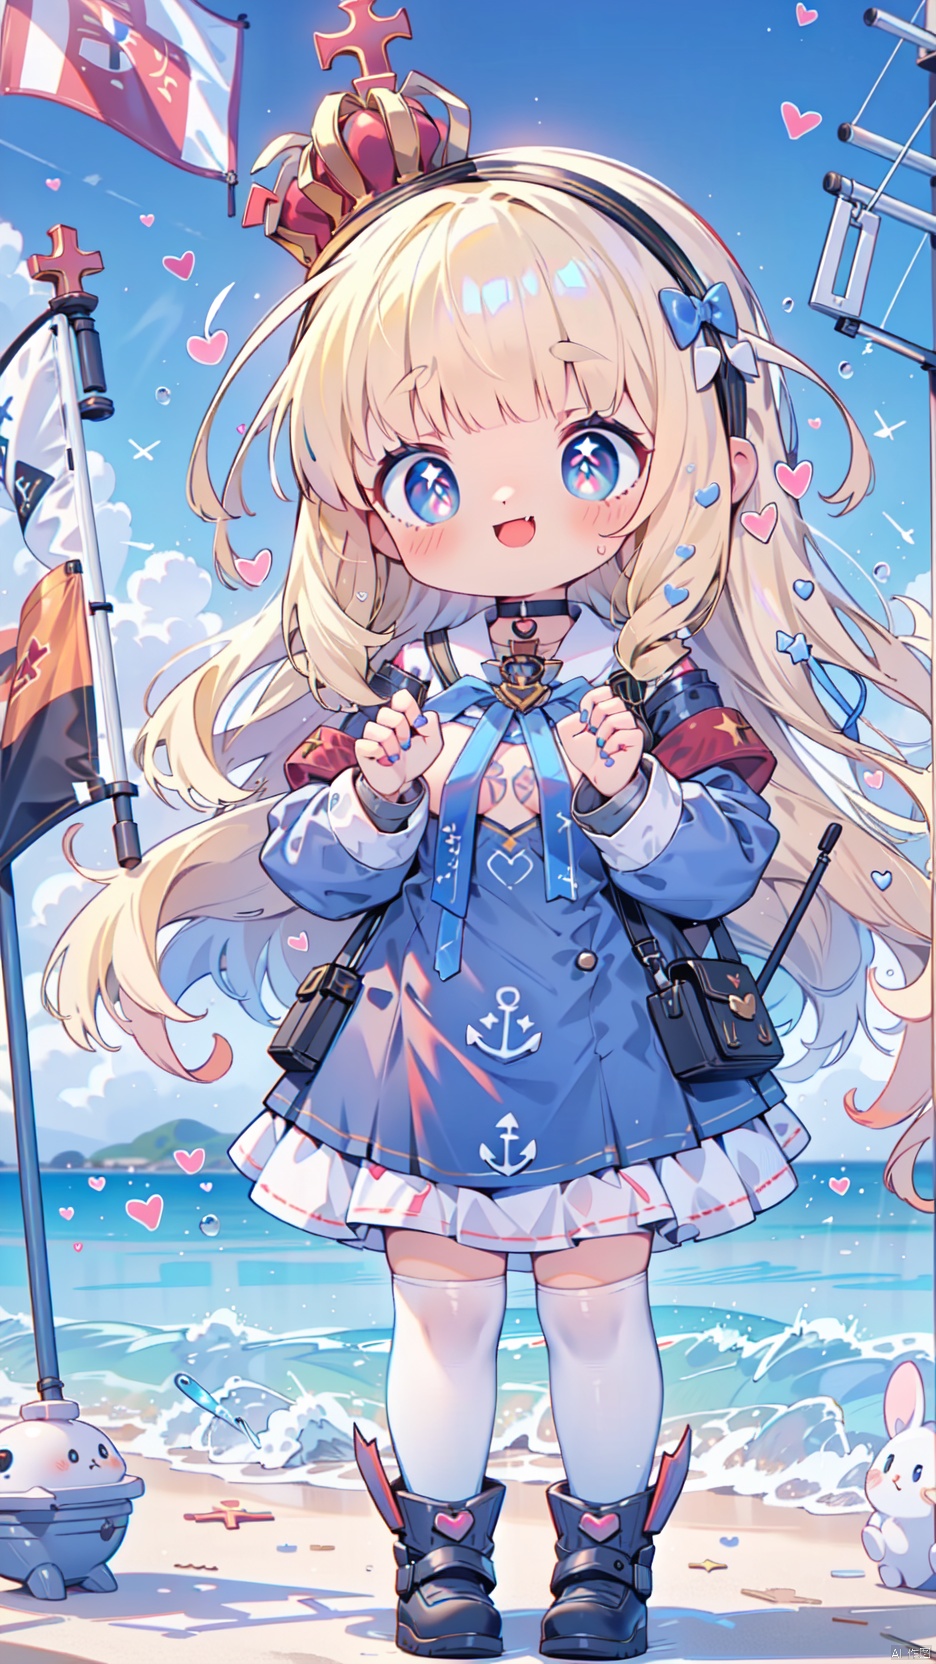  queen elizabeth (azur lane),Little girl(1.5),aged down,beautiful detailed girl,Glowing skin,steaming body,narrow waist,(very small breasts),Delicate cute face,princess crown,small crown,anchor choker,pubic tattoo,(anchor print naval uniform),ornate clothes,fine fabric emphasis,blue eyes,beautiful detailed eyes,Glowing eyes,((heart-shaped pupils)),((blonde hair)),((hair spread out,wavy hair)),very long shoulder,glowing hair,Extremely delicate hair,Thin leg,white legwear garter,black footwear,Slender fingers,steepled fingers,shiny nails,((standing,holding a flag,english flag)),ahegao(expression),smile,open mouth,tongue out,licking lips,drooling,heavy breathing,fangs out,big fangs,puffy cheeks,beautiful detailed mouth,looking at viewer,semen(ornament),warship,harbor,royal navy (emblem),hyper realistic,magic,4k,incredible quality,best quality,masterpiece,highly detailed,extremely detailed CG,cinematic lighting,light particle,backlighting,full body,high definition,detail enhancement,(perfect hands, perfect anatomy),8k_wallpaper,extreme details,colorful, shuiwa, loli, backlight, mirrornun, pop style